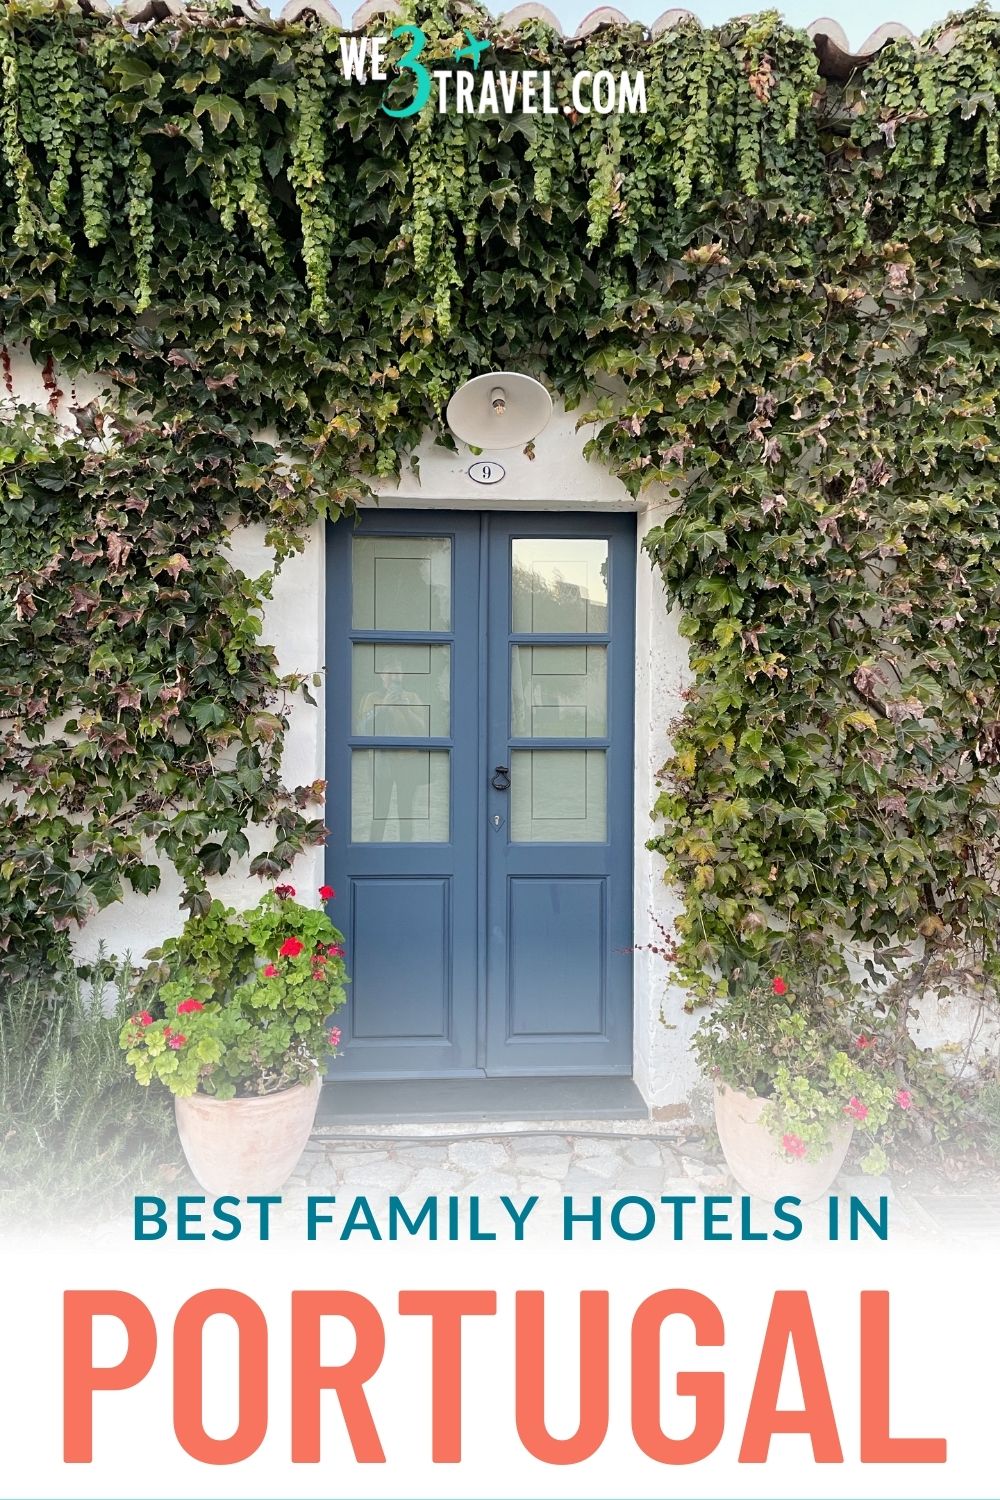 Best family hotels in Portugal -- if you are looking for kid-friendly resorts to visit Portugal with kids, this rounds up the best family-friendly hotels and resorts in Portugal.